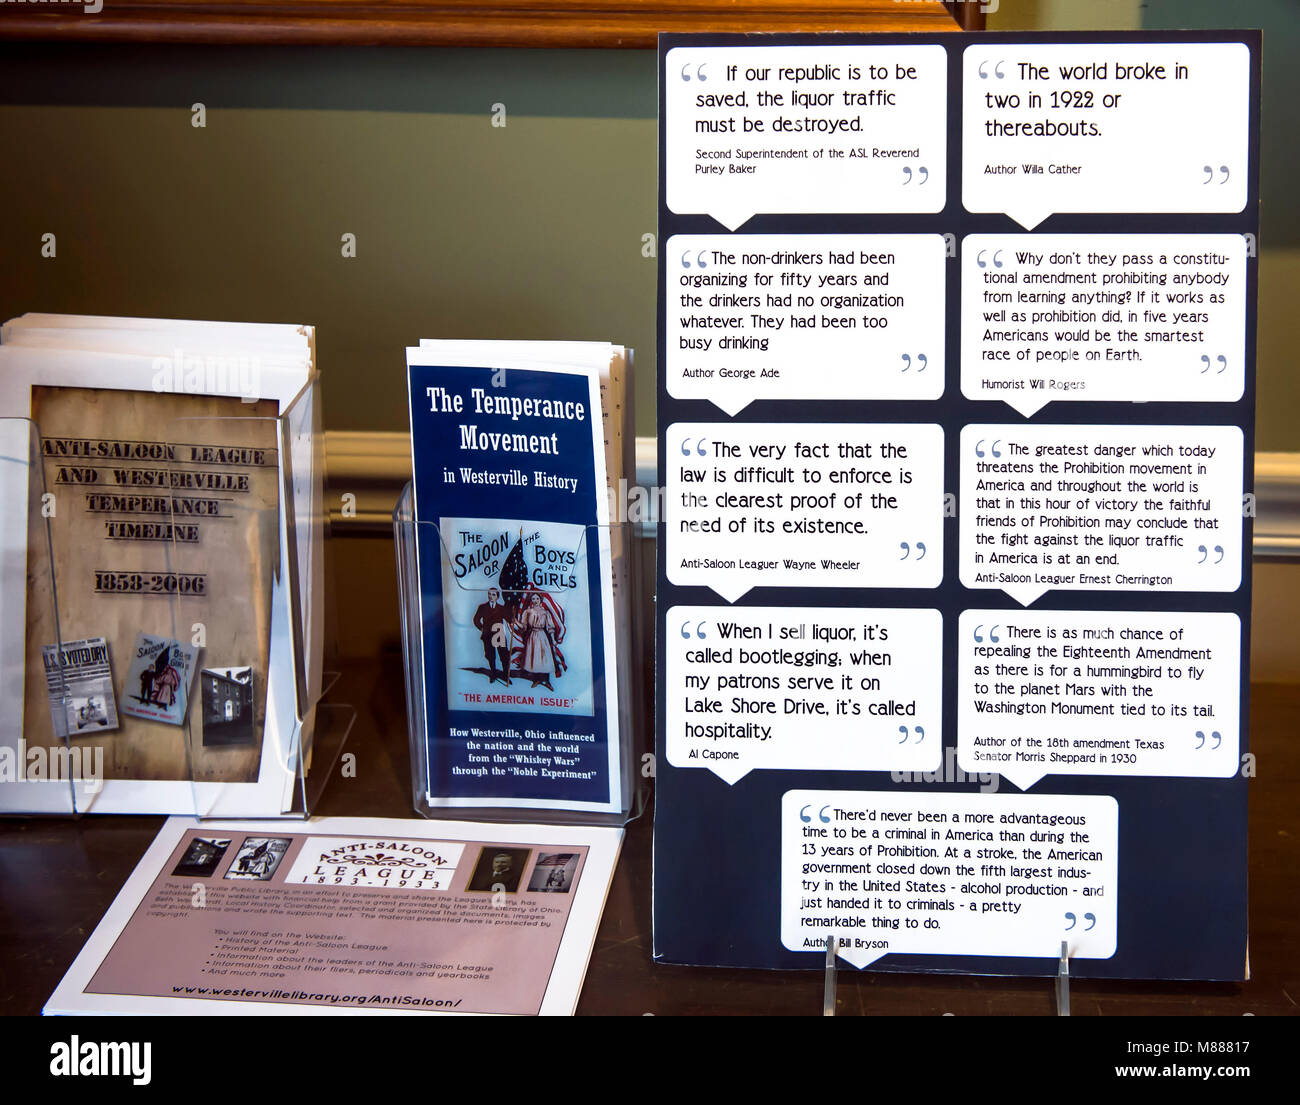 Westerville, Ohio, USA. 15th Mar, 2018. The Anti-Saloon League Museum at the Westerville Public Library houses a large collection of materials relating to the political organization, which, through lobbying and the printed word, turned a moral crusade against the manufacture, sale and consumption of alcohol into the 18th Amendment to the United States Constitition. The League and its publishing company wwere able to promote the temperance cause by publishing thousands of fliers, pamphlets, songs, stories, cartoons, dramas, magazines and newspapers in the very same building that now serves Stock Photo